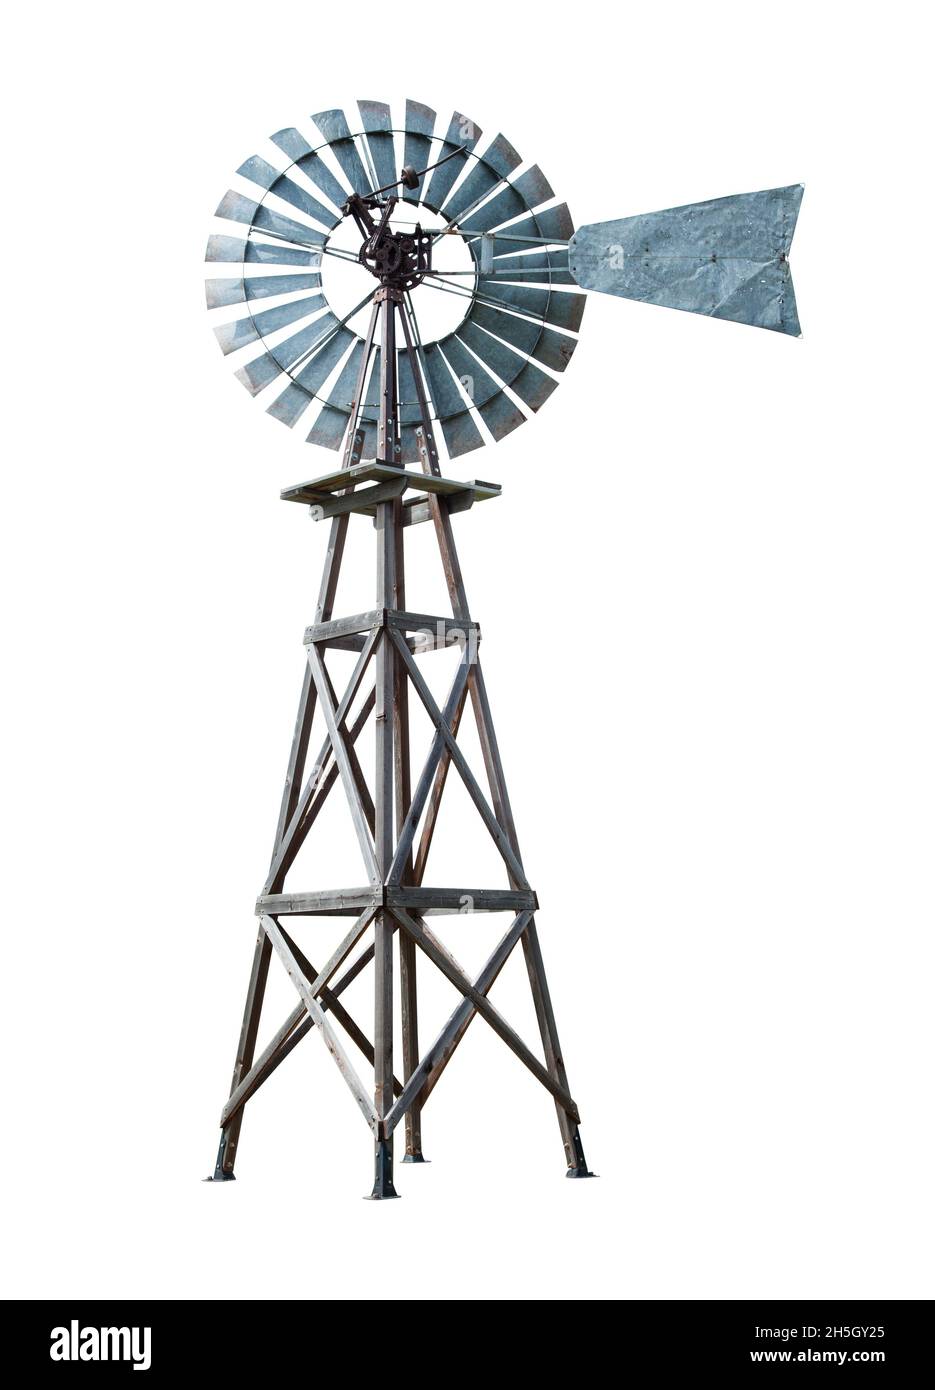 Old Farm Windmill Water Pump Turbine Cut Out on White. Stock Photo